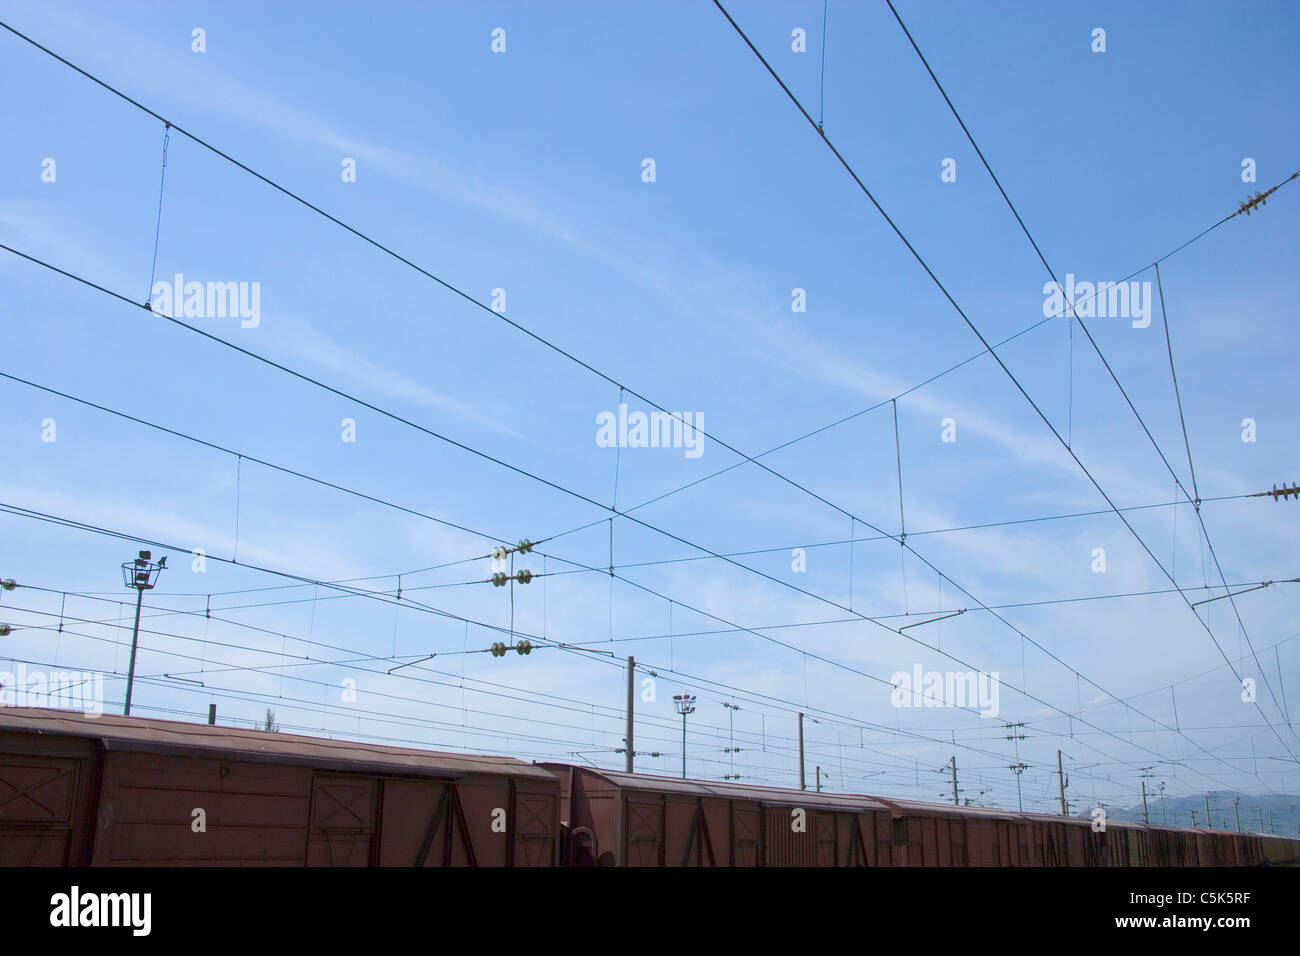 Freight train and power lines as seen from inside the railroad station, Fevzipasa, near Gaziantep / Antep, Turkey Stock Photo